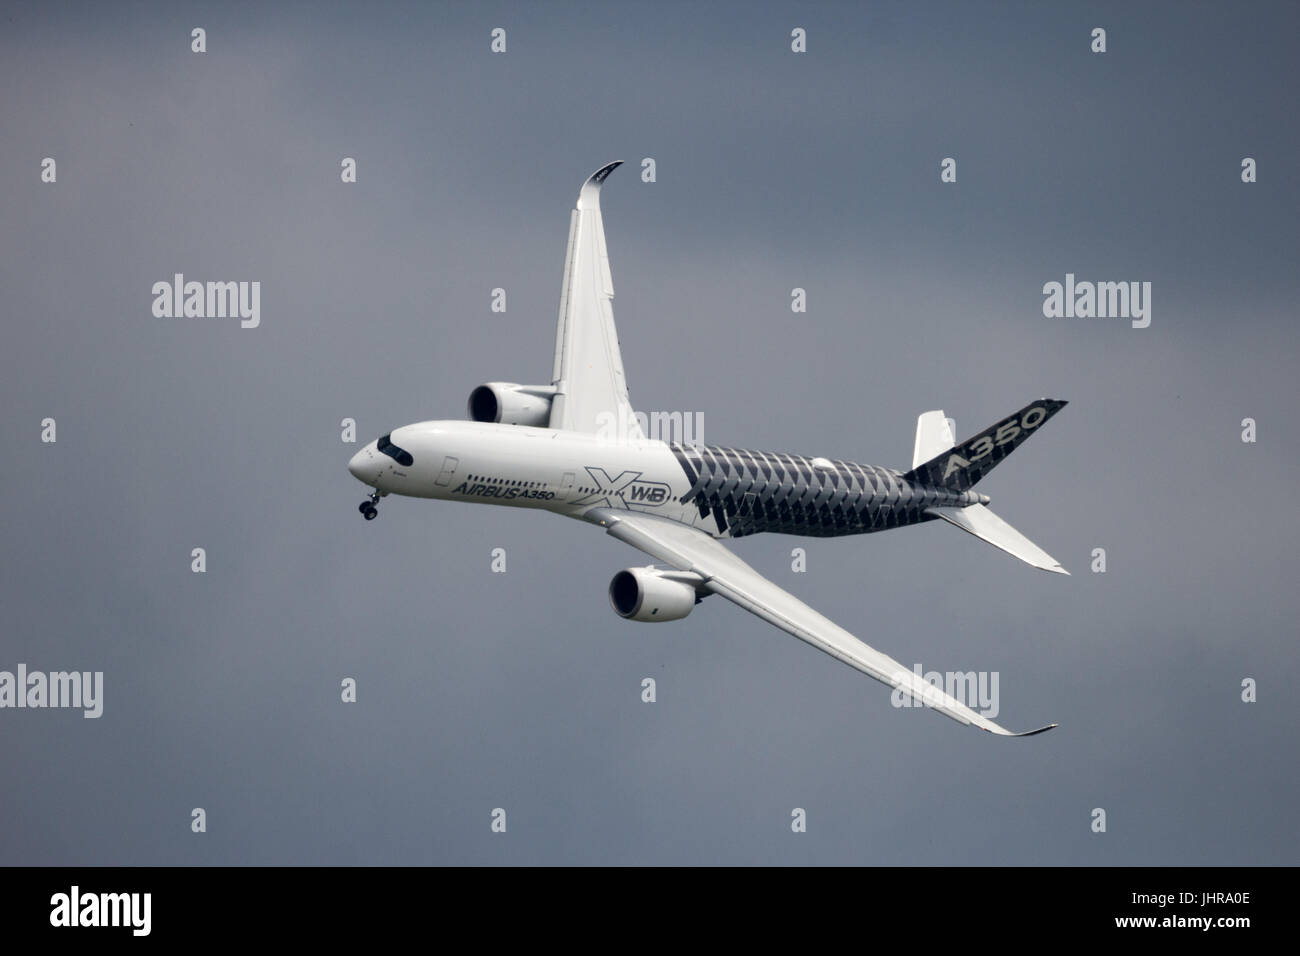 BERLIN - JUN 2, 2016: The new Airbus A350 XWB airliner flyby at Berlin-Schoneveld airport. Stock Photo